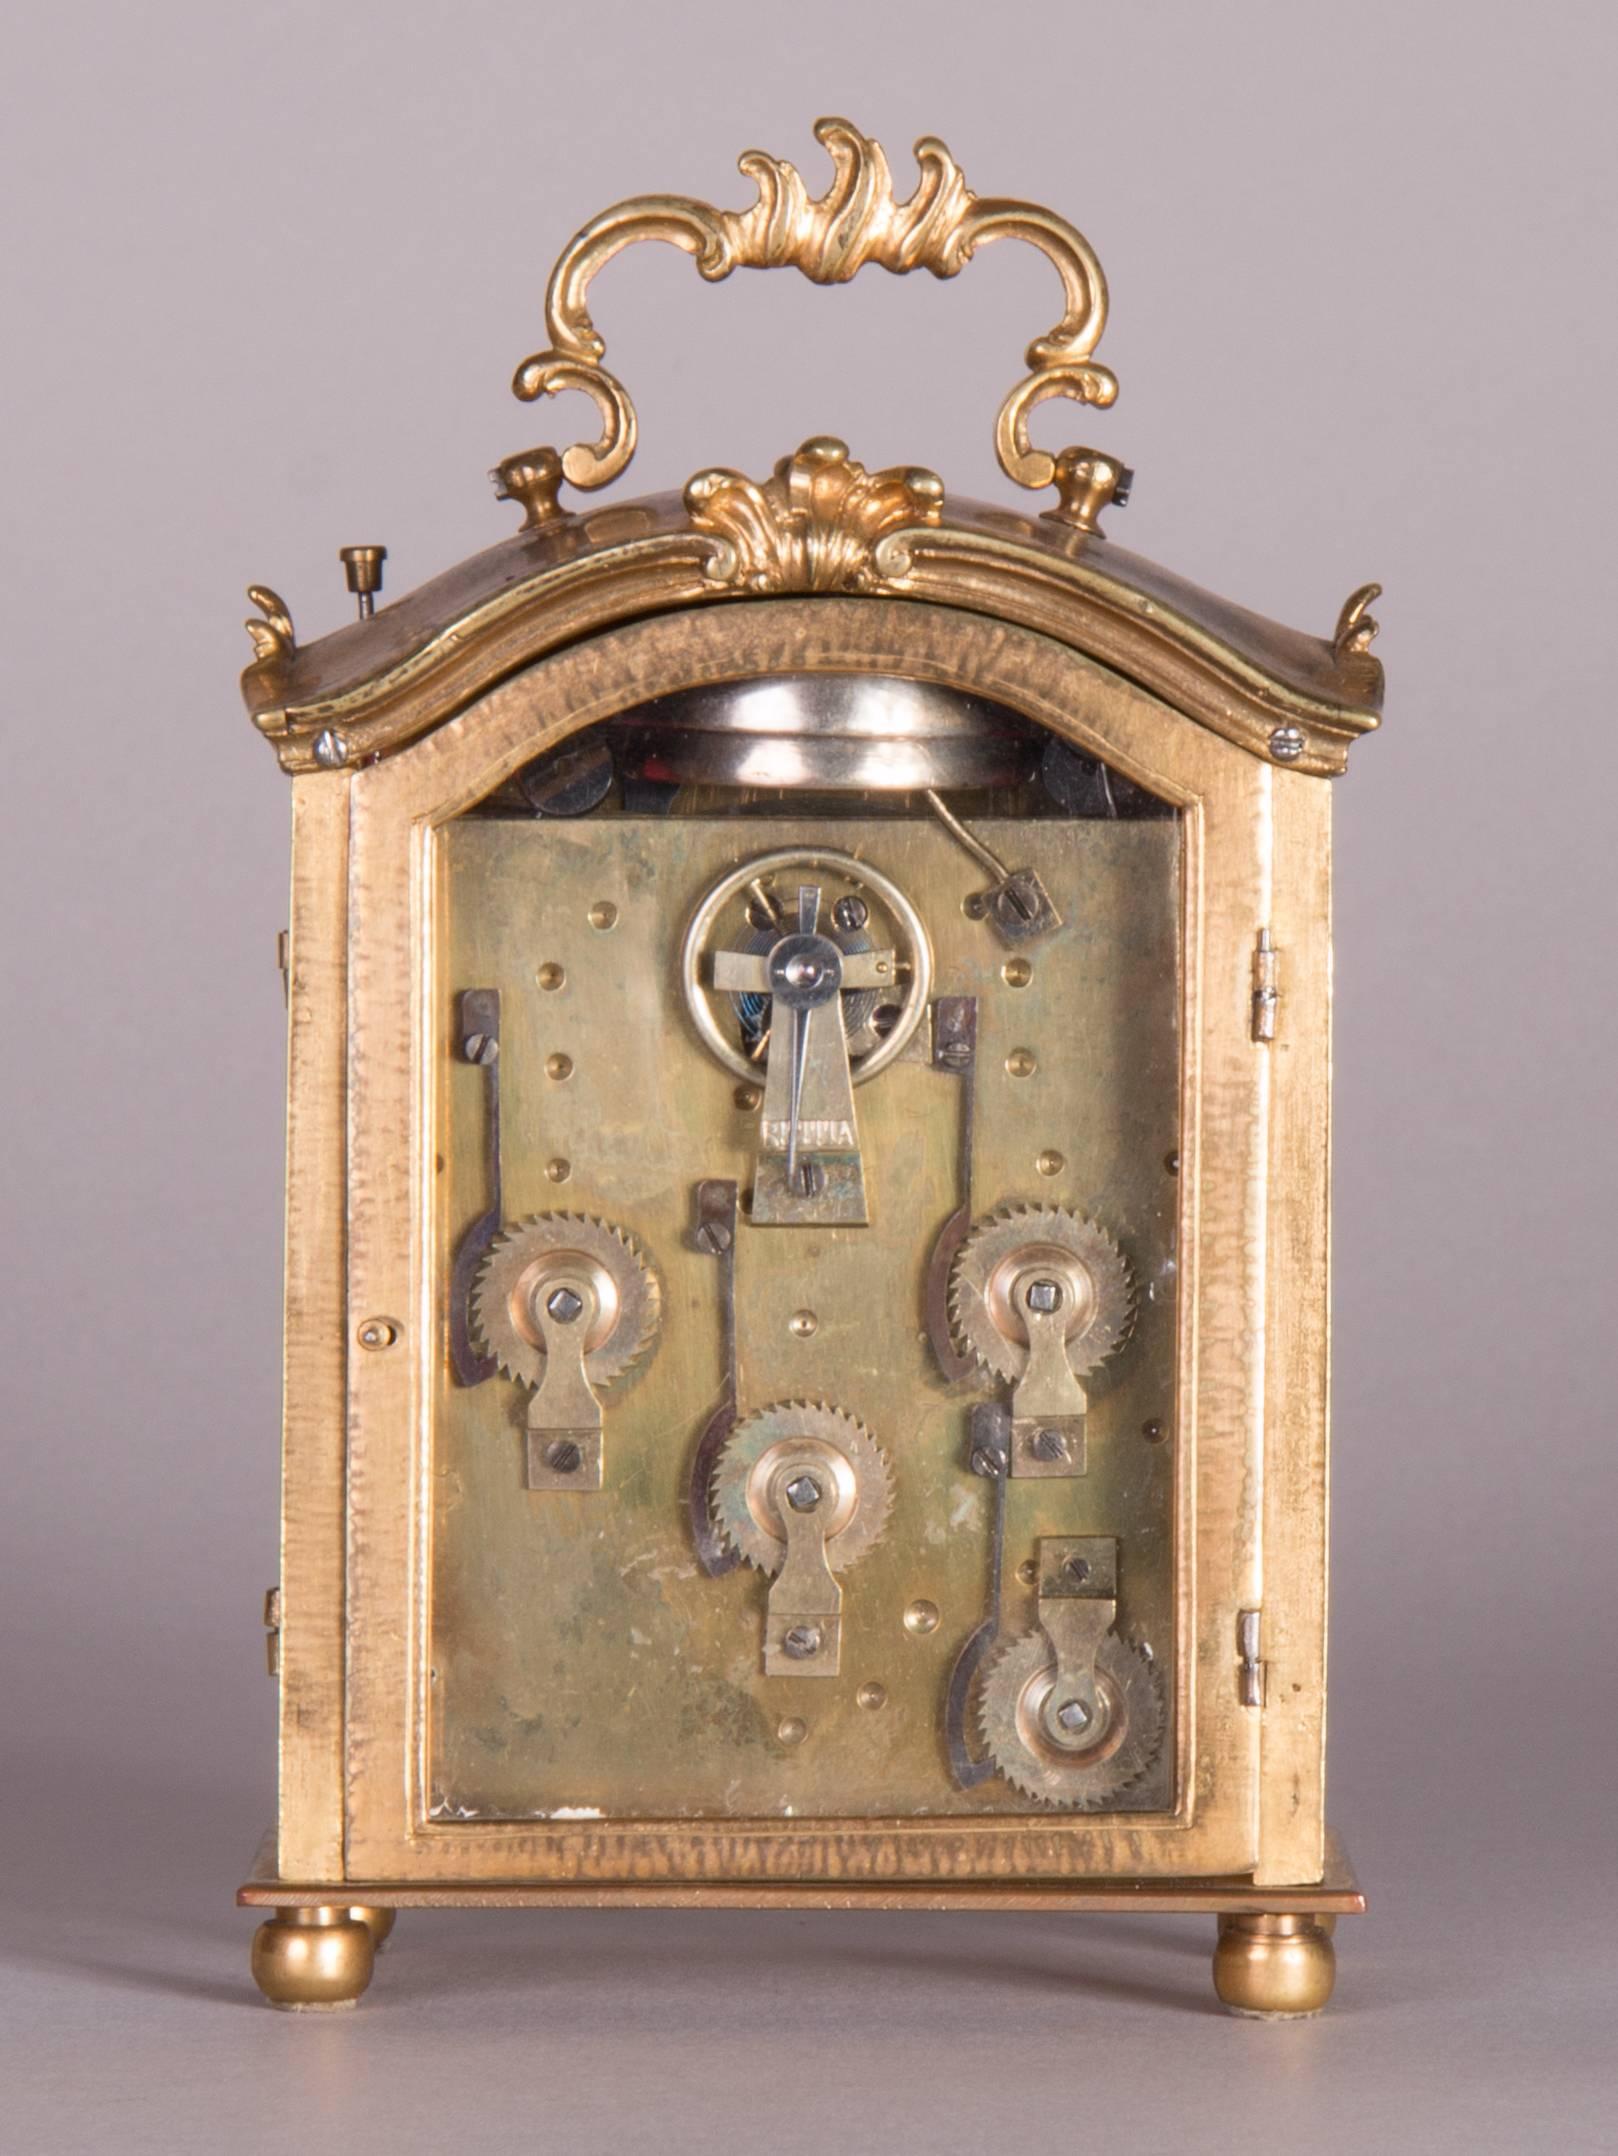 Dresden (?) circa 1750
Height: 15.5 cm, width: 9 cm, depth: 5.3 cm
Gilt brass case, silvered chapter ring enclosing a central alarm dial, indication of the date, blued steel hands, movement around 1850 specially made for this case, grande sonnerie